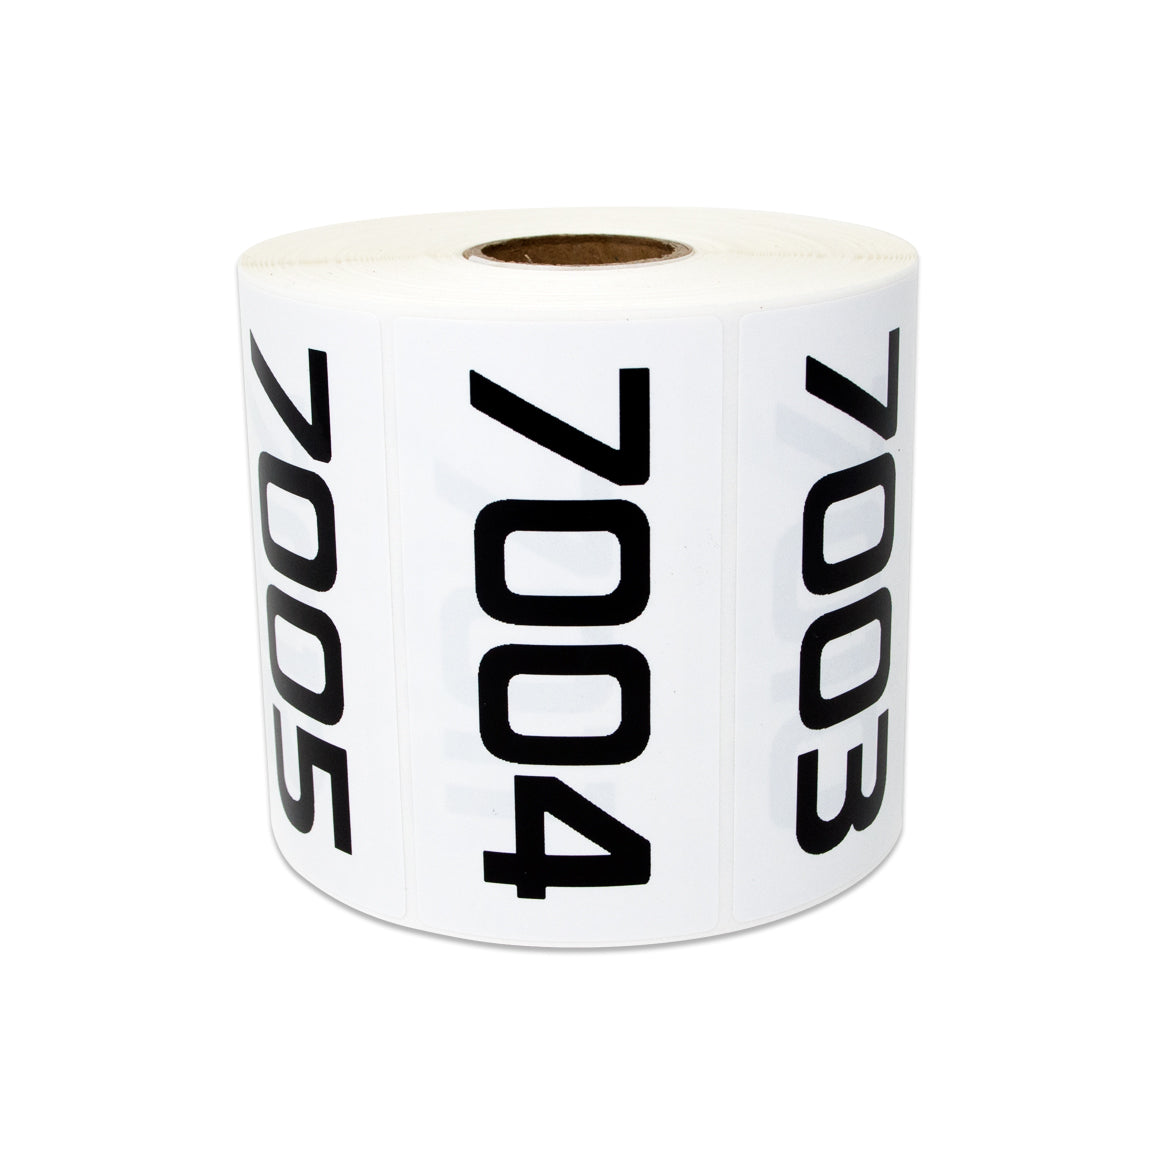 3 x 1.5 inch | Inventory: Consecutive Numbers "7001 to 8000" Stickers